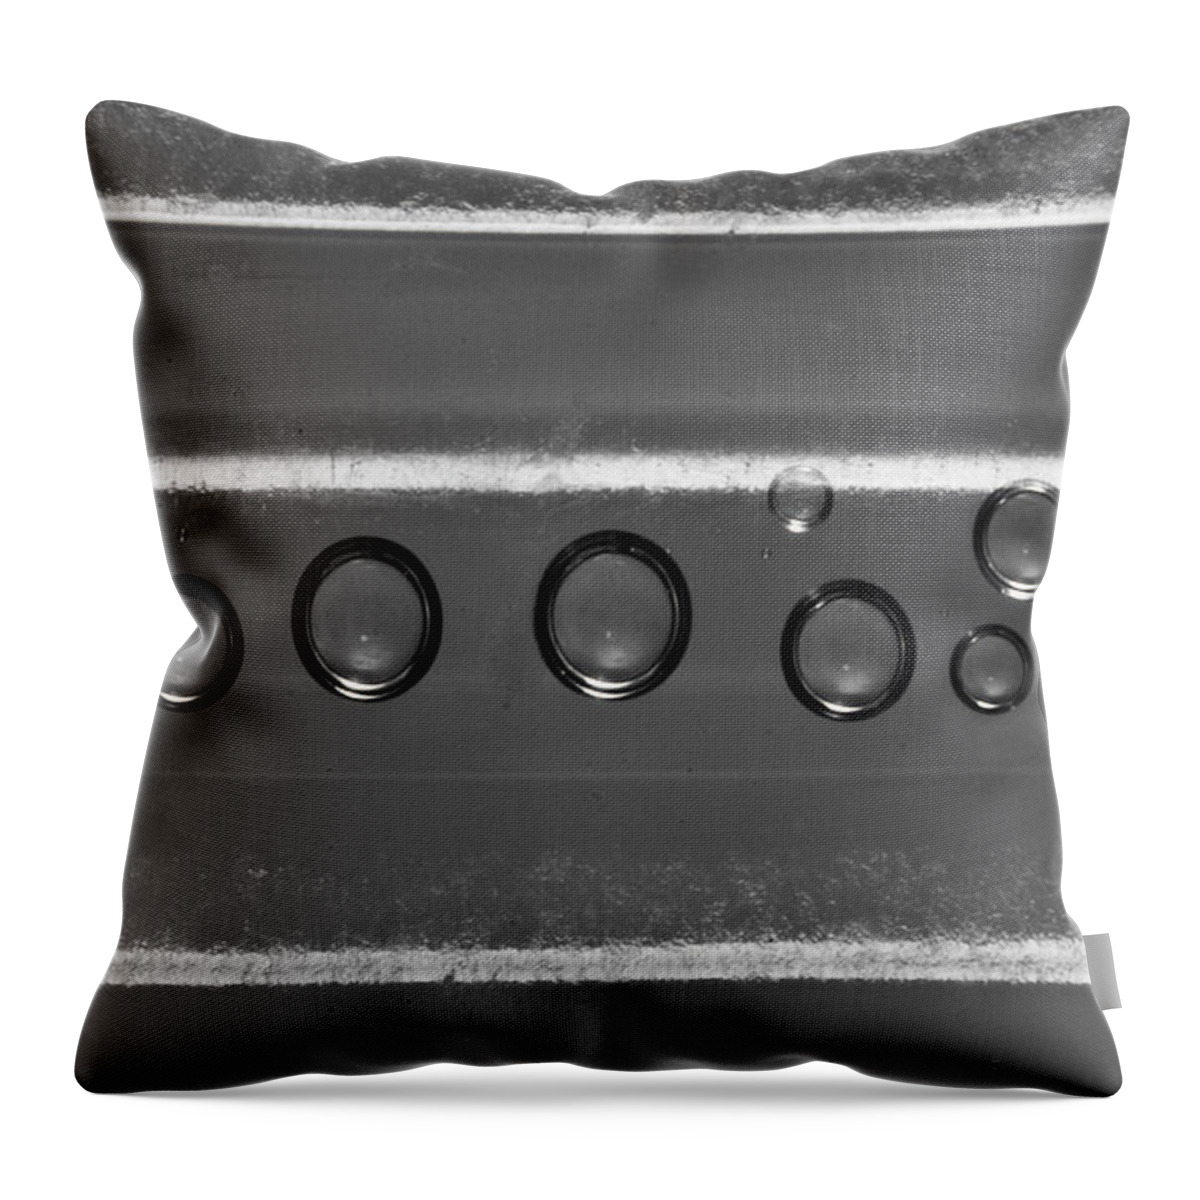 Condensation Throw Pillow featuring the photograph Condensation 3 by Morgan Wright